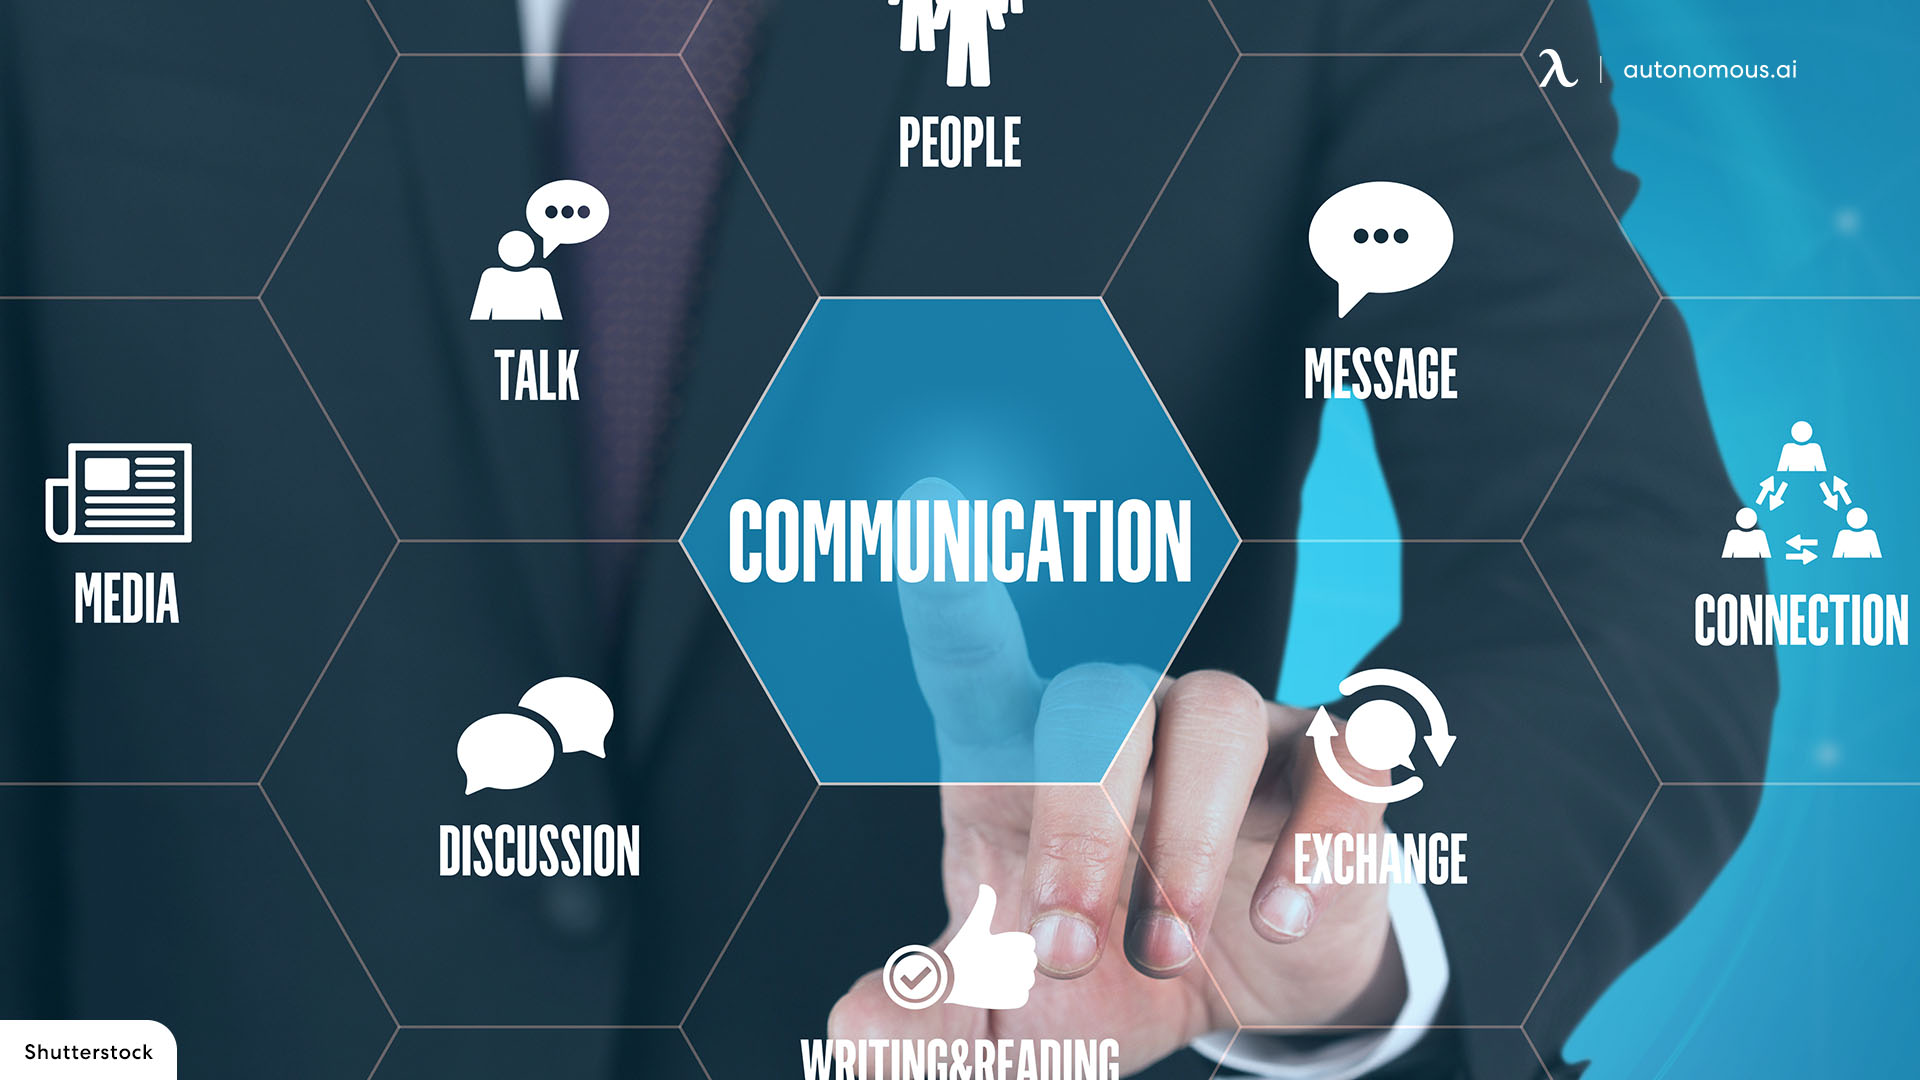 How Can Remote Workers Improve Their Communication Skills?